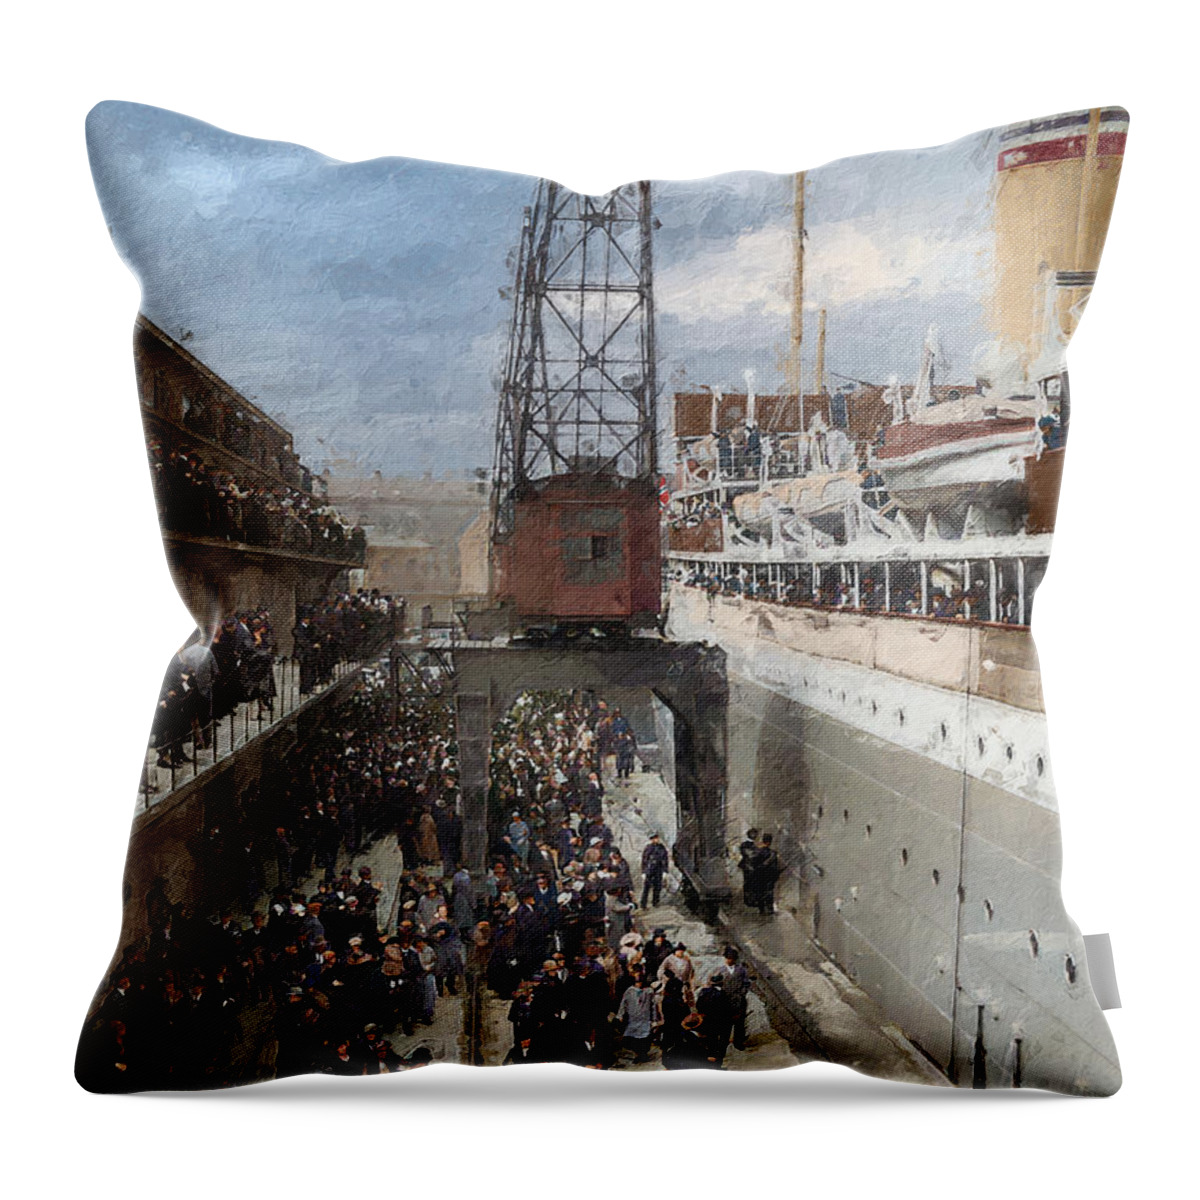 Steamer Throw Pillow featuring the digital art Welcome Home by Geir Rosset